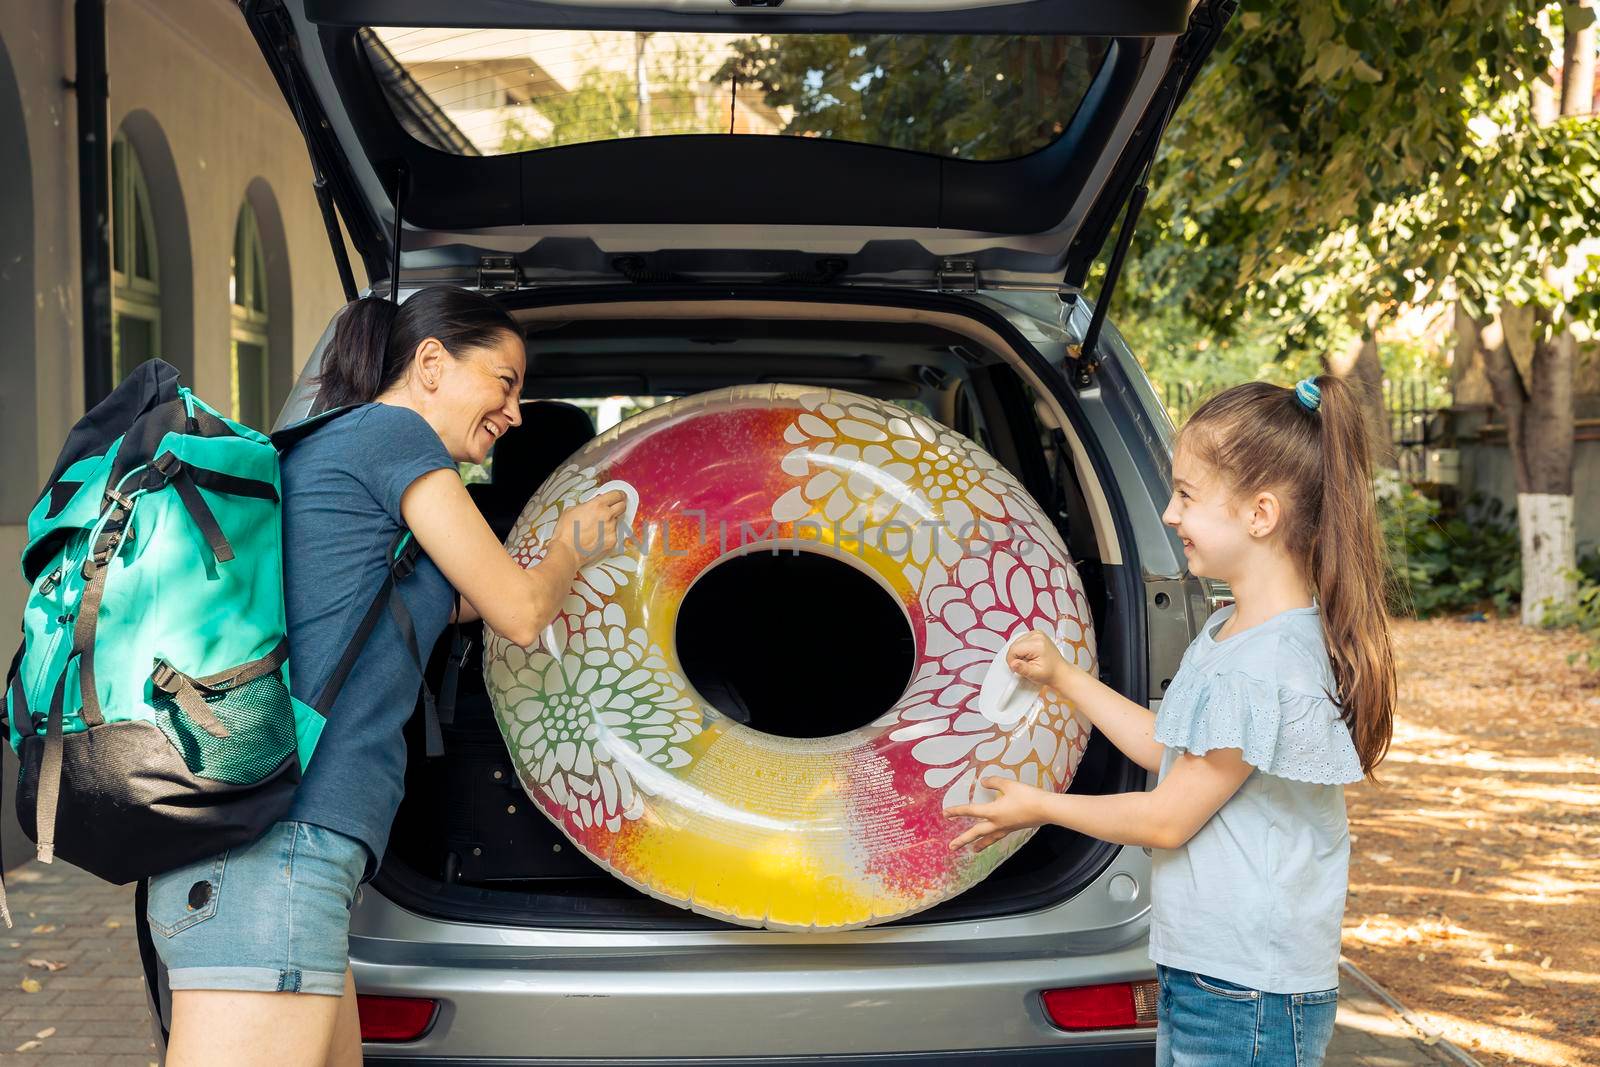 Mother and young child travelling by car, going to seaside with inflatable and luggage. Loading suitcase, baggage and travel bags in trunk of vehicle to leave on summer holiday vacation.